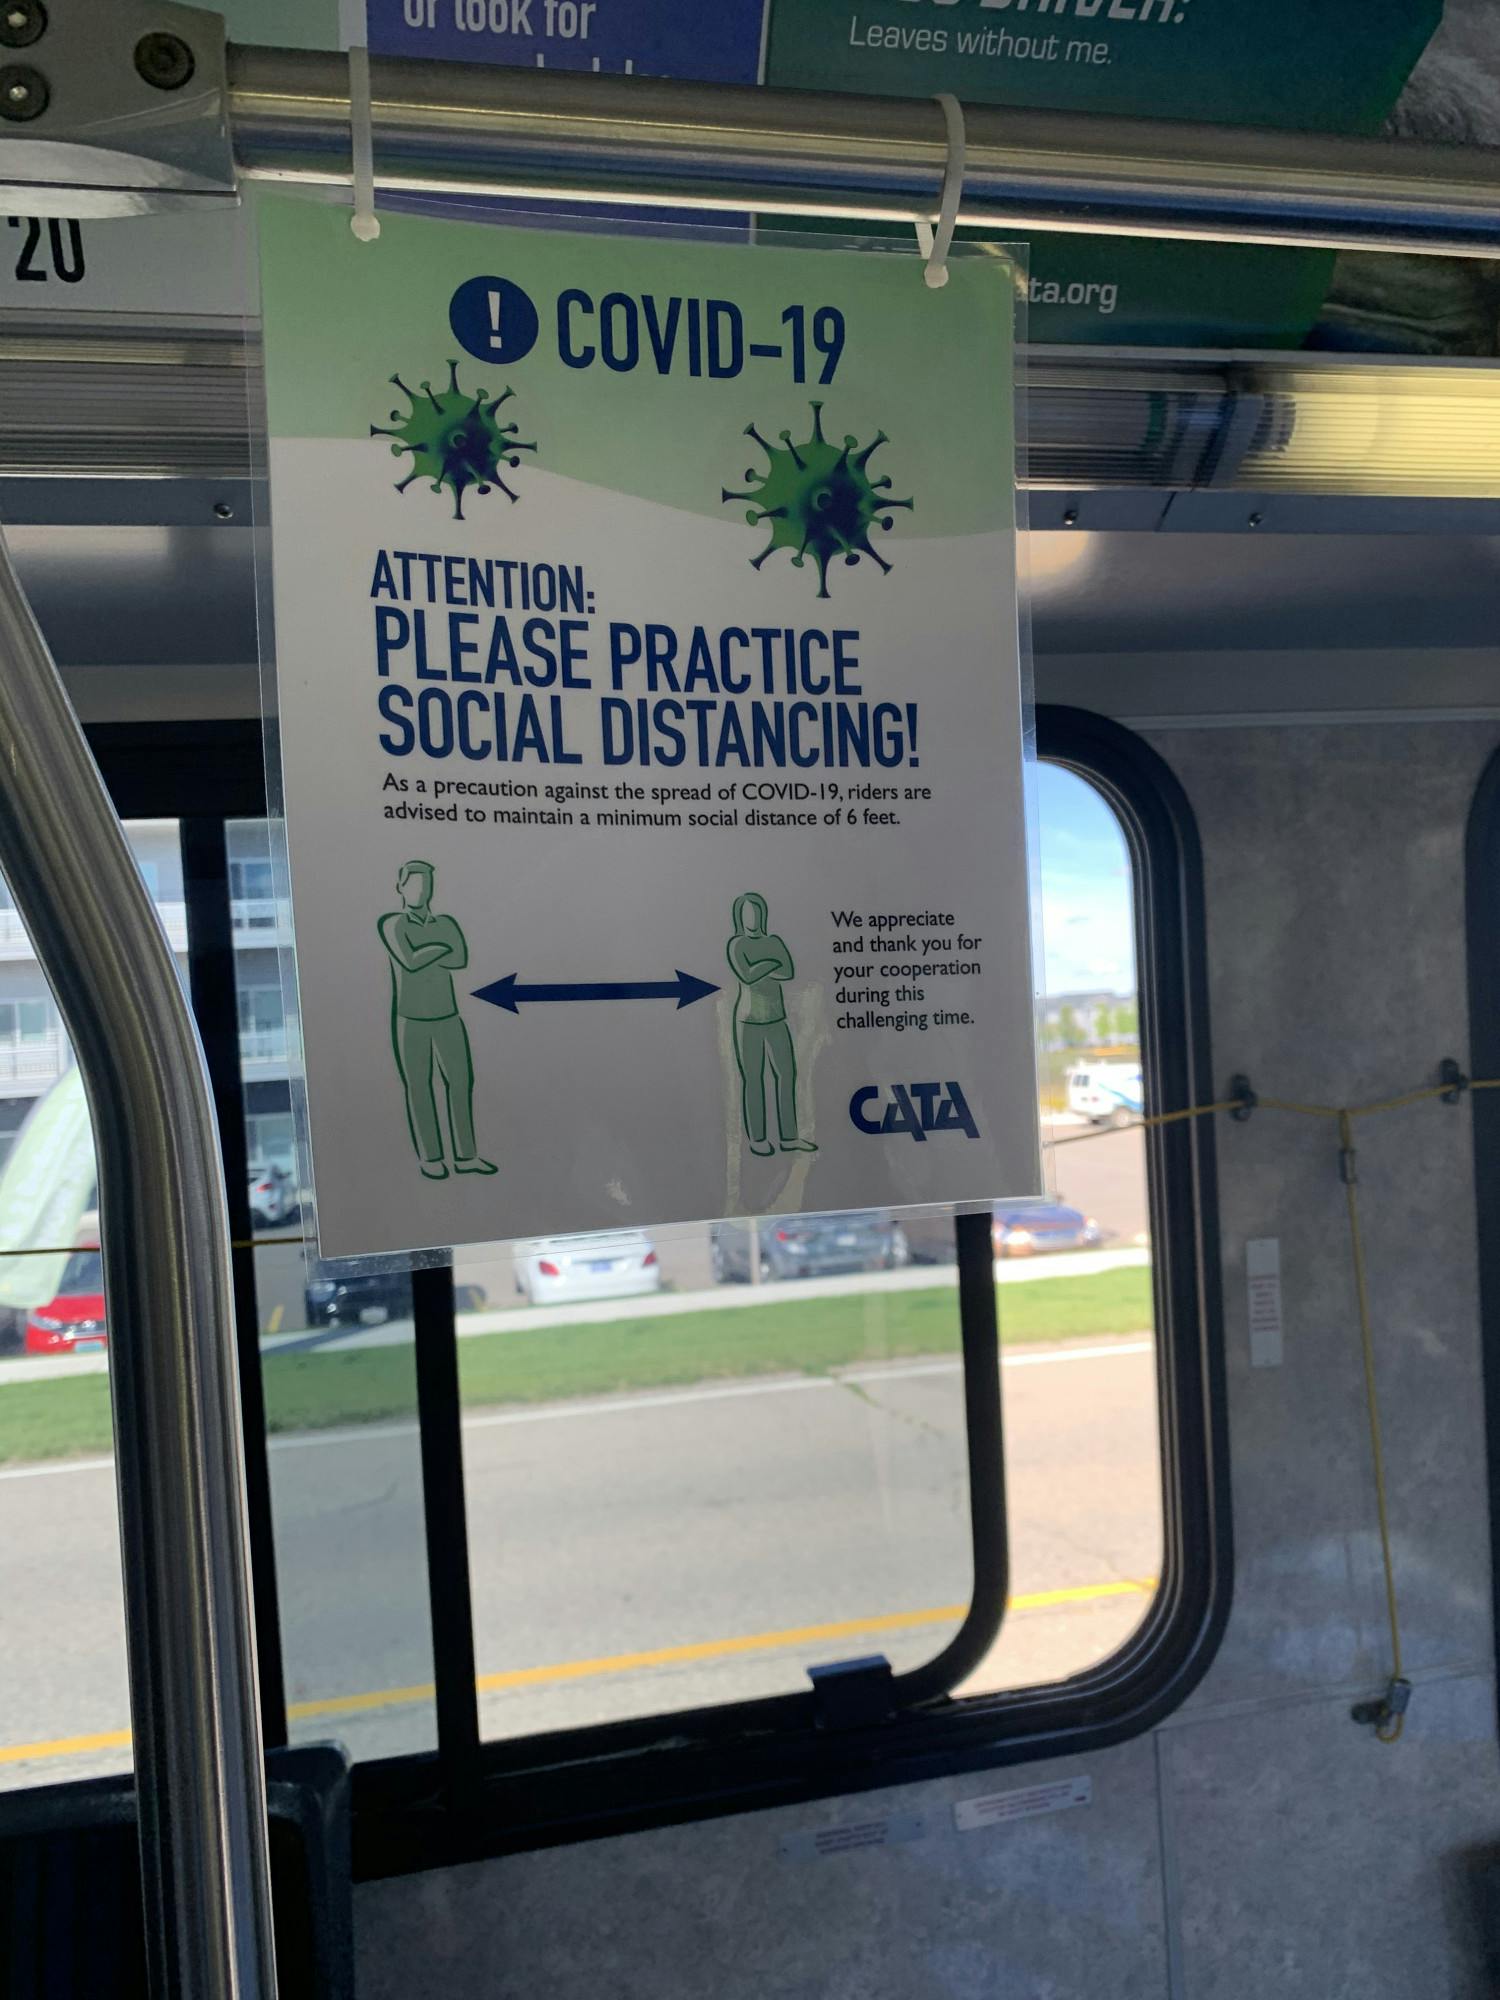 <p>A COVID-19 social distancing sign is pictured inside an empty CATA bus on August 31, 2020.</p>